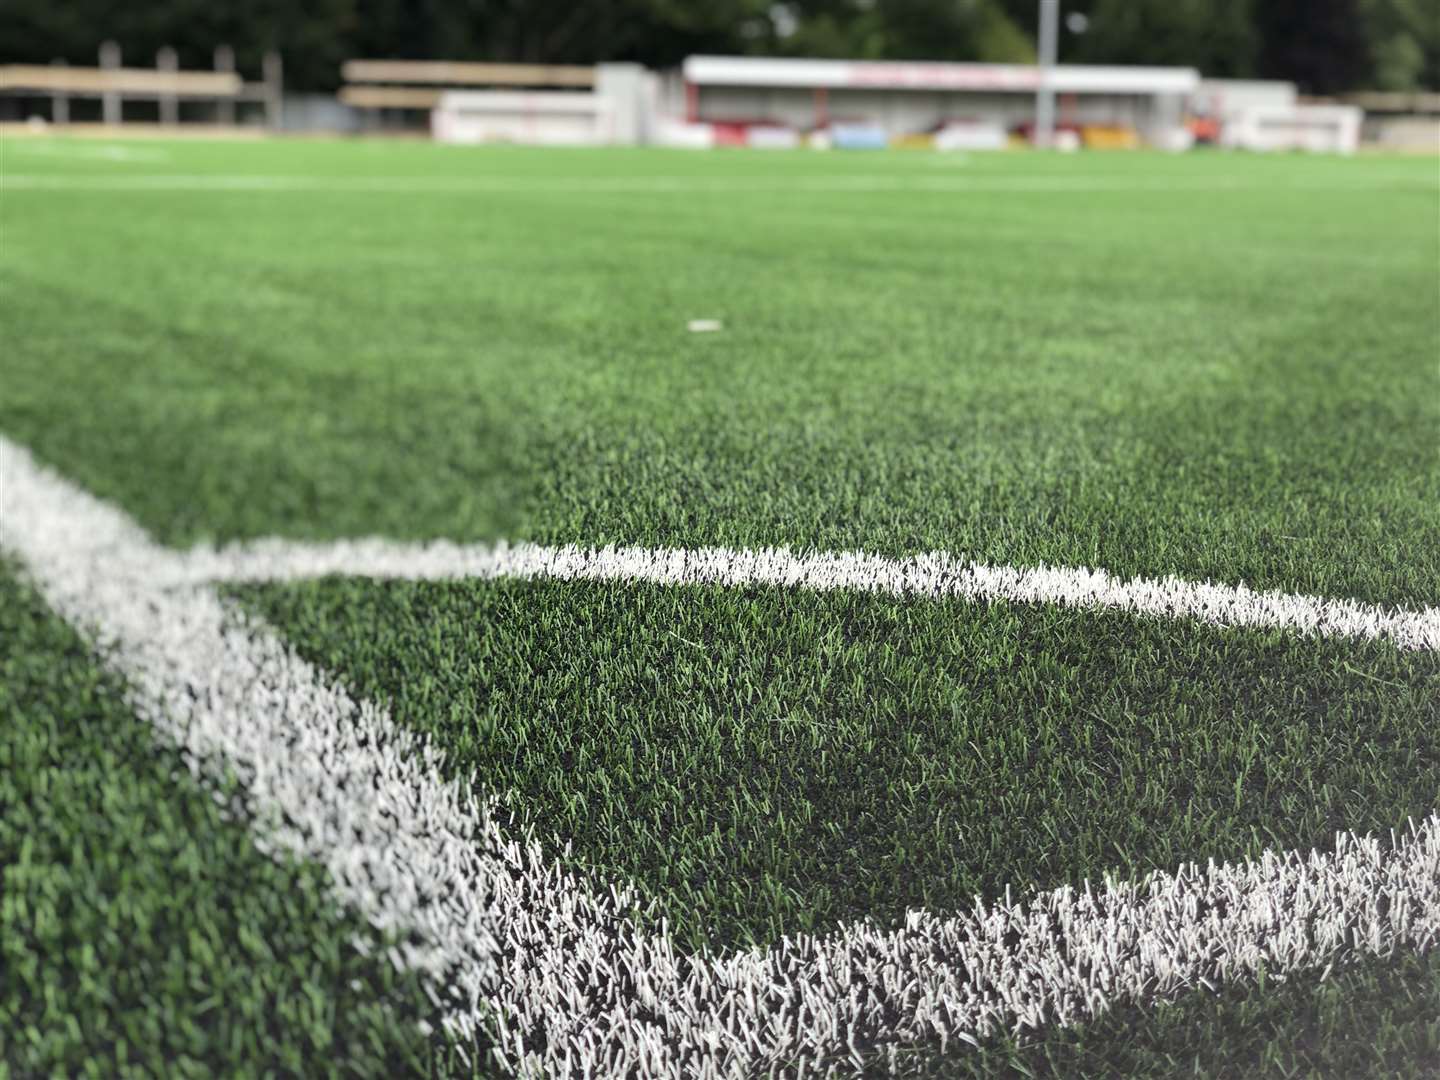 It took eight weeks to lay a new 3G pitch at the Bauvill Stadium Picture: Chatham Town FC